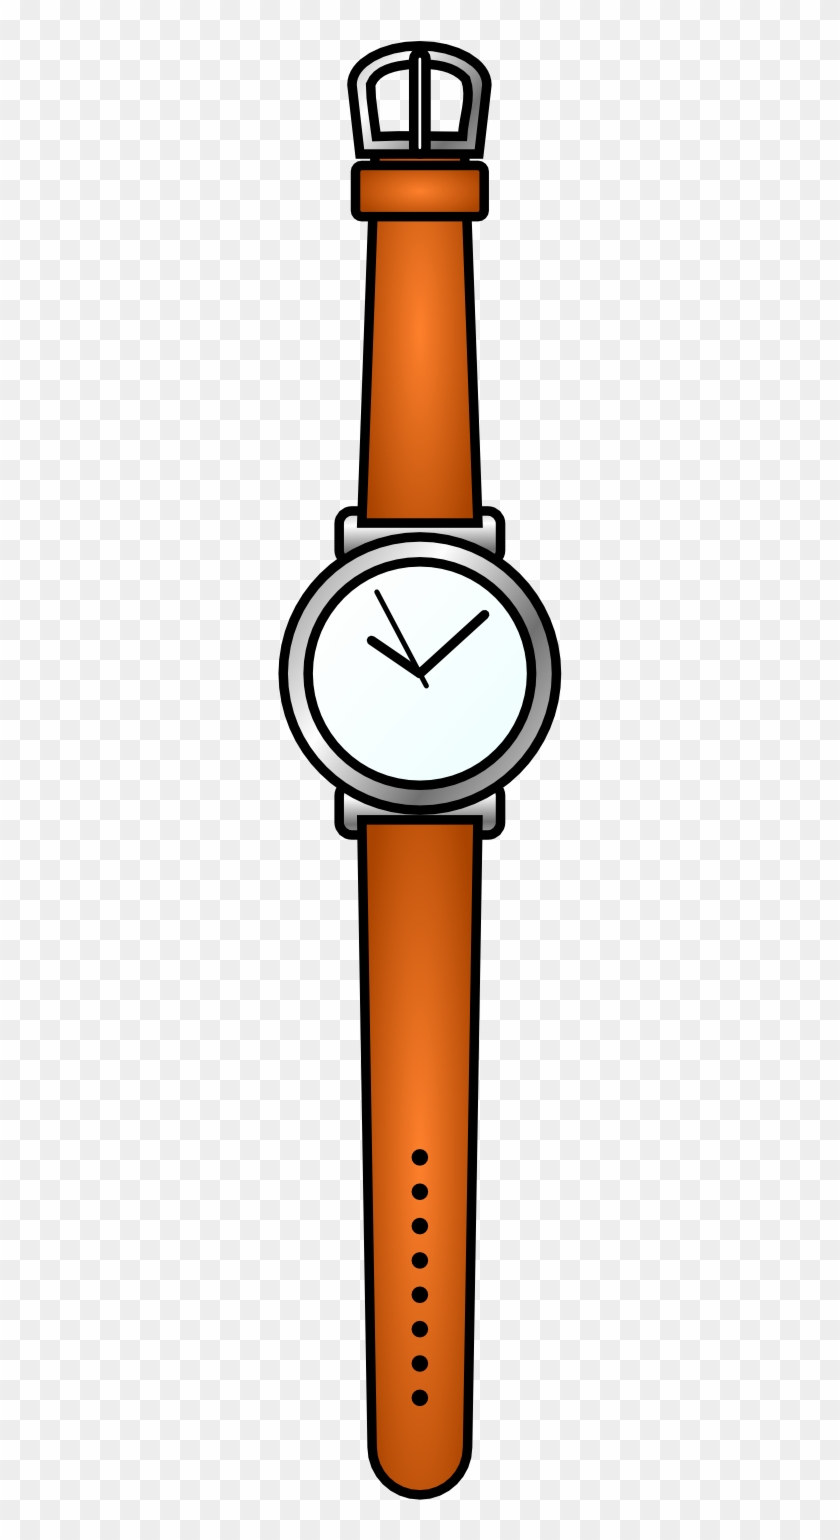 Watches Clipart - Wrist Watch Clipart - Png Download #2705274